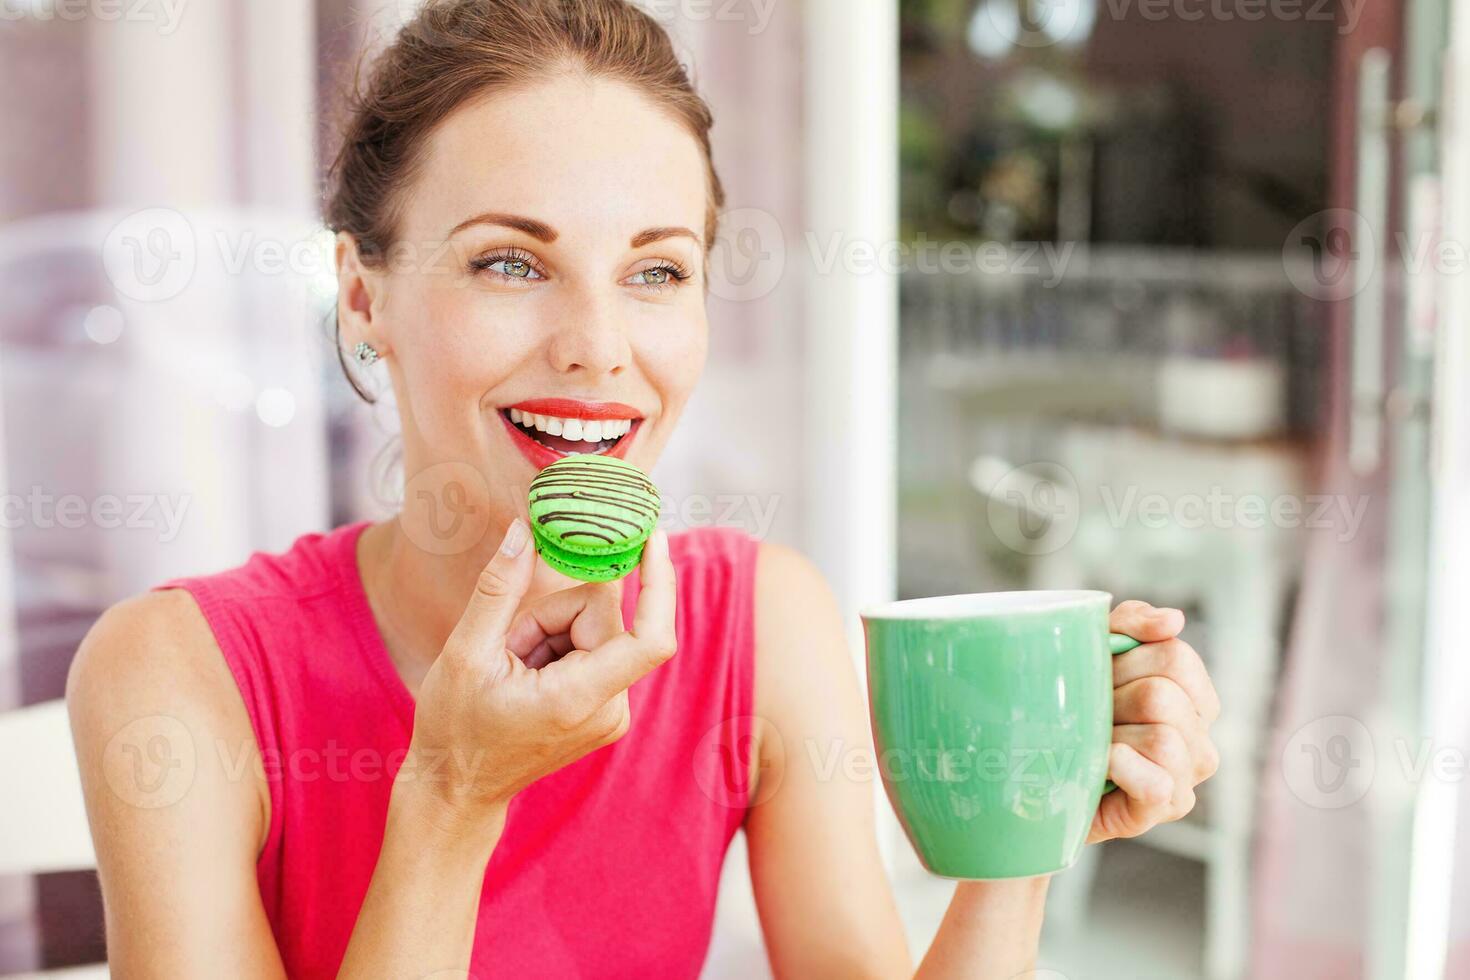 woman looking at macaron she's going to eat. Lovely color combination of pink and green photo